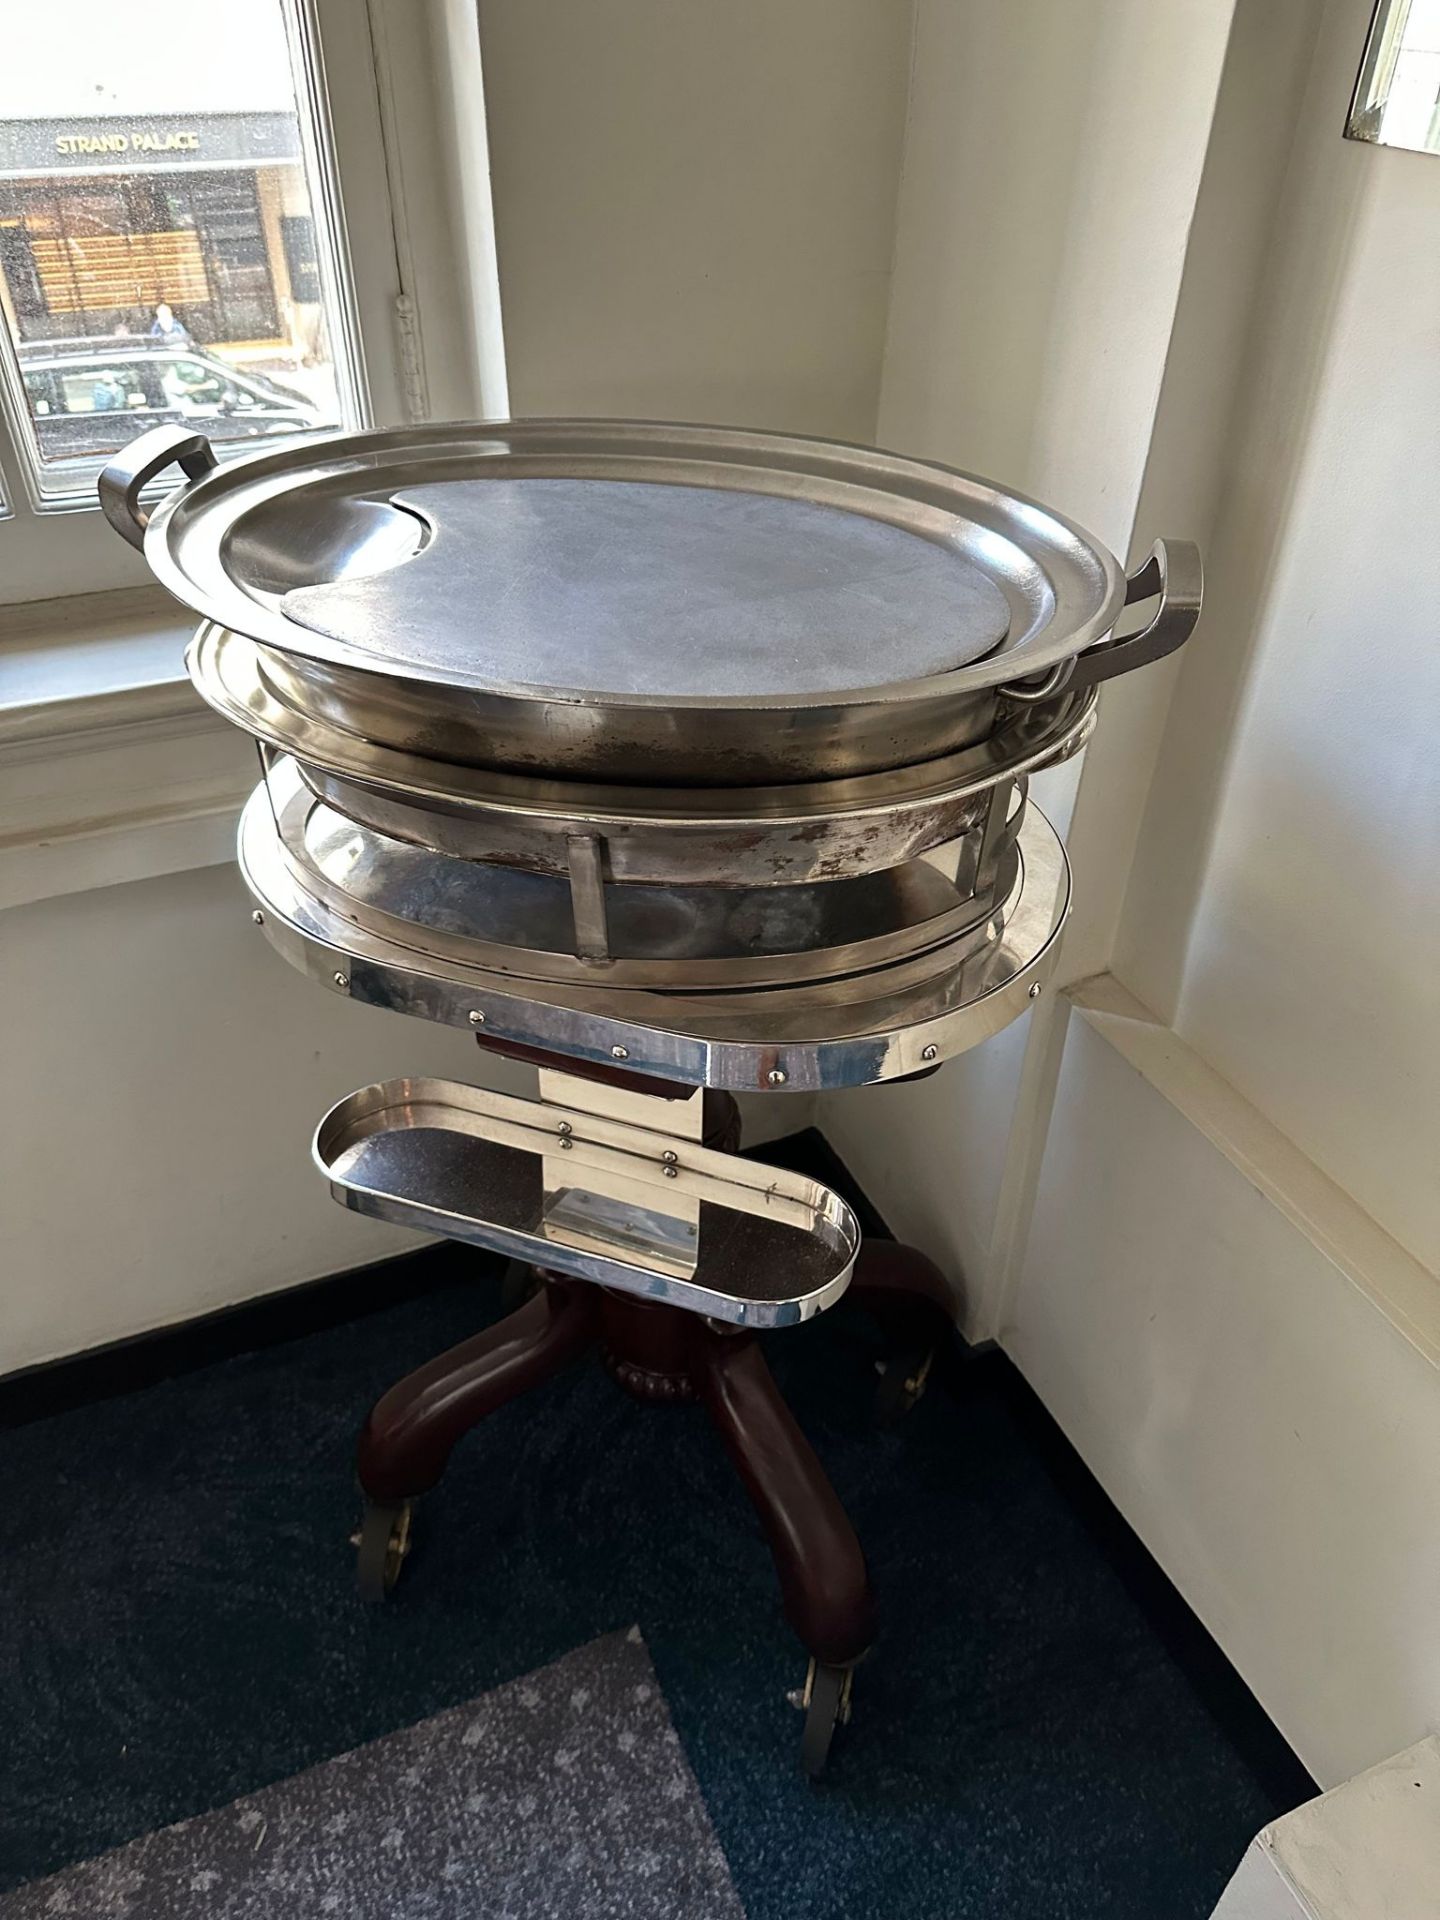 Mahogany Meat Carving Unit With Mahogany Baluster Frame On Caster Wheels With 2 Stainless Steel Tray